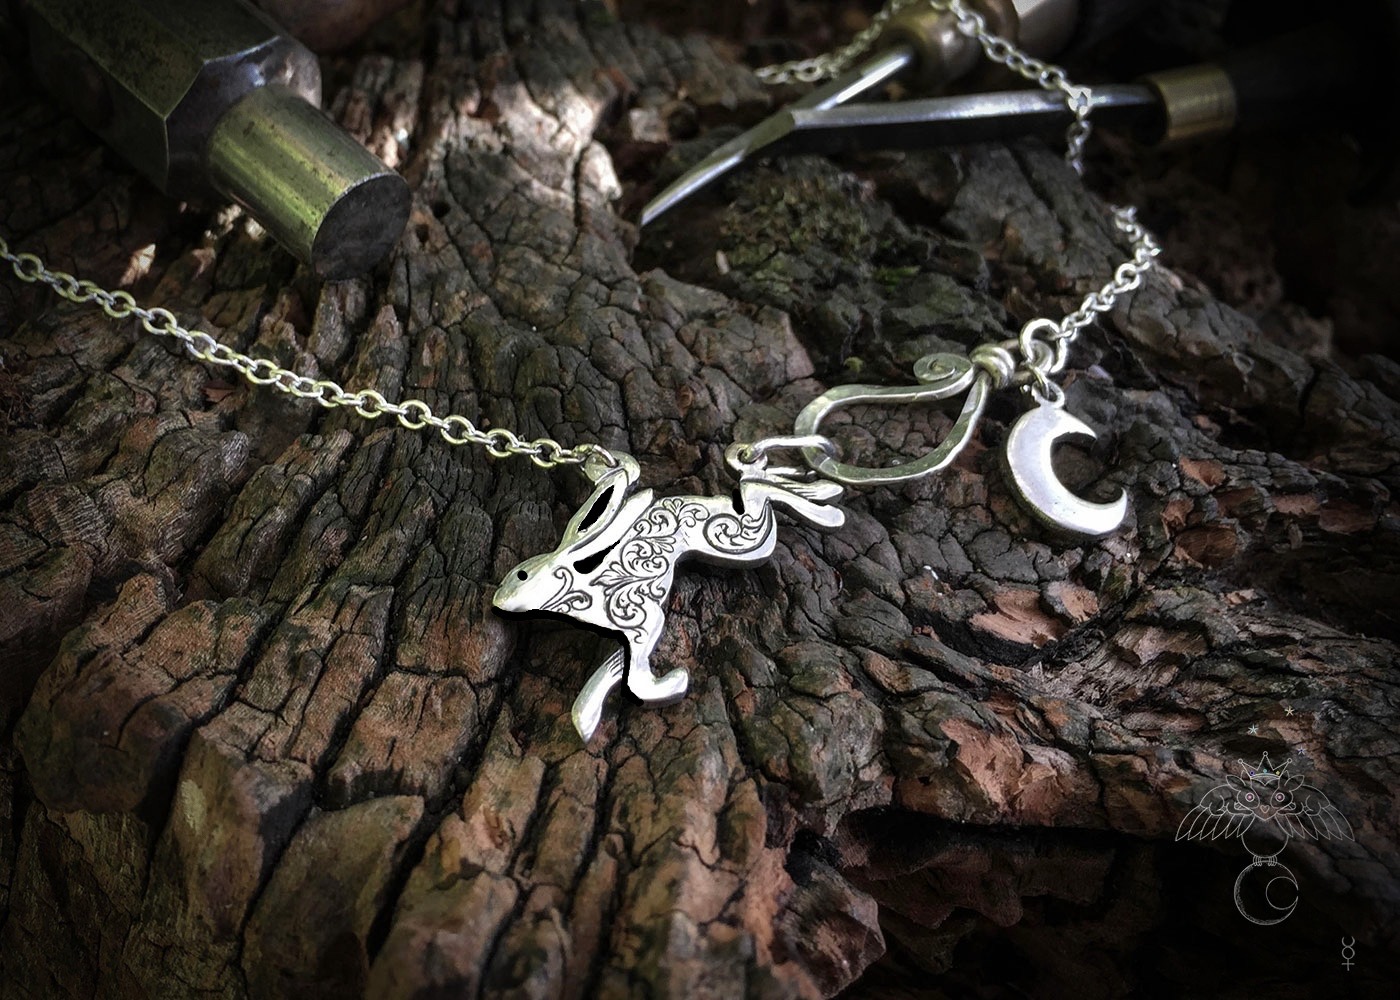 Leaping hare necklace handmade and recycled silver coin jewellery ethically handcrafted at an independant artisan studio workshop